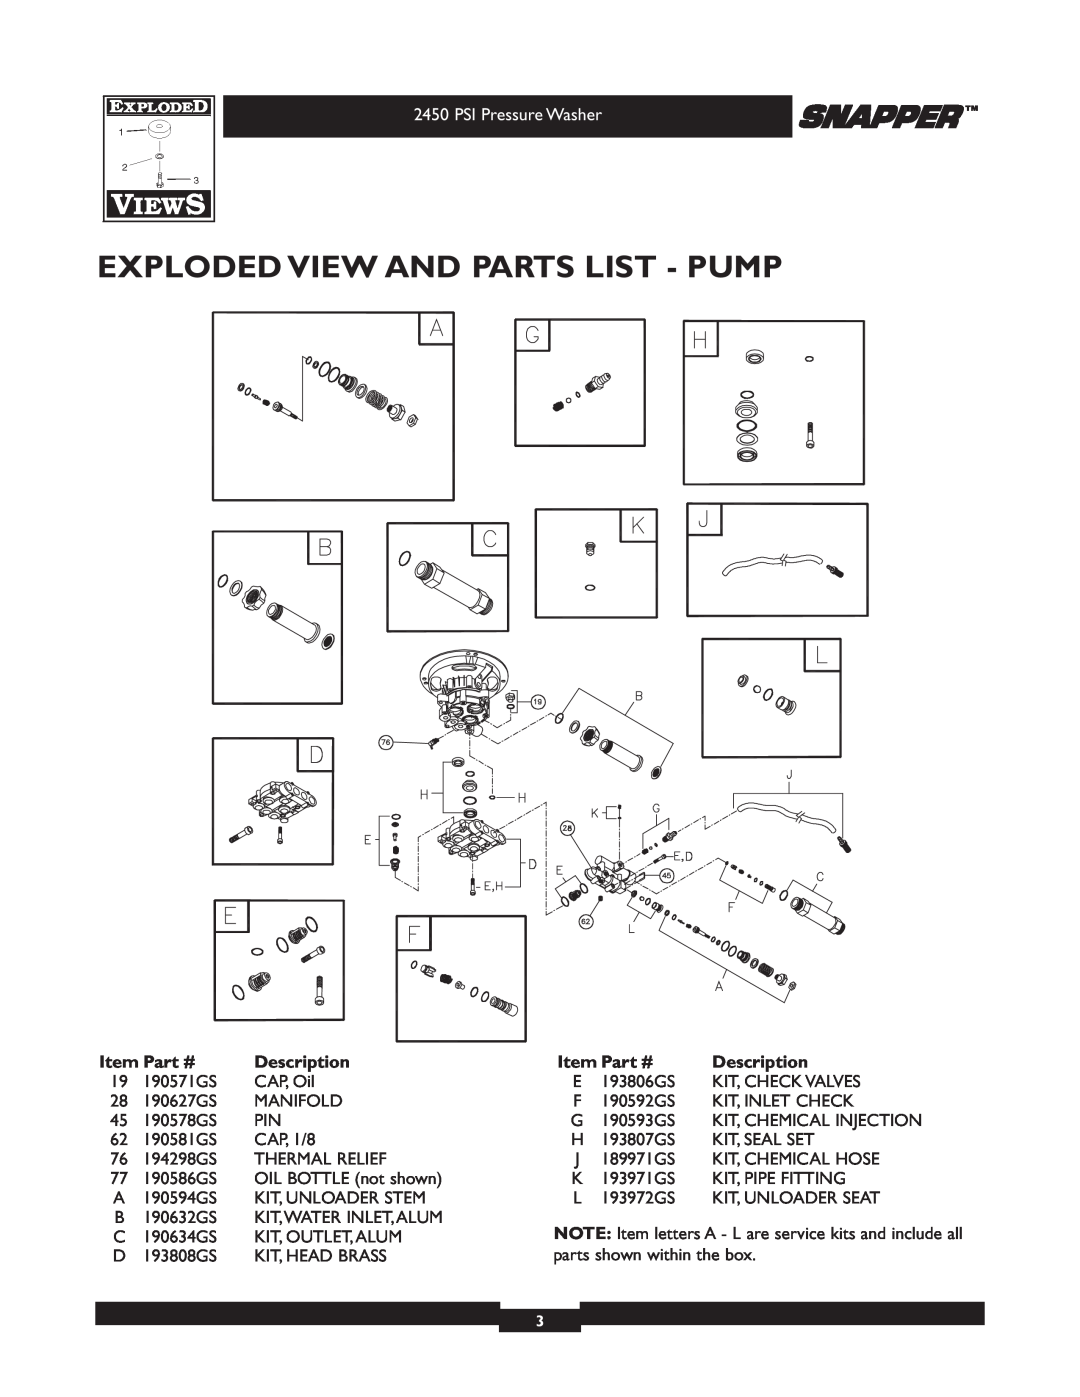 Snapper 20229 manual Exploded View And Parts List - Pump, PSI Pressure Washer 